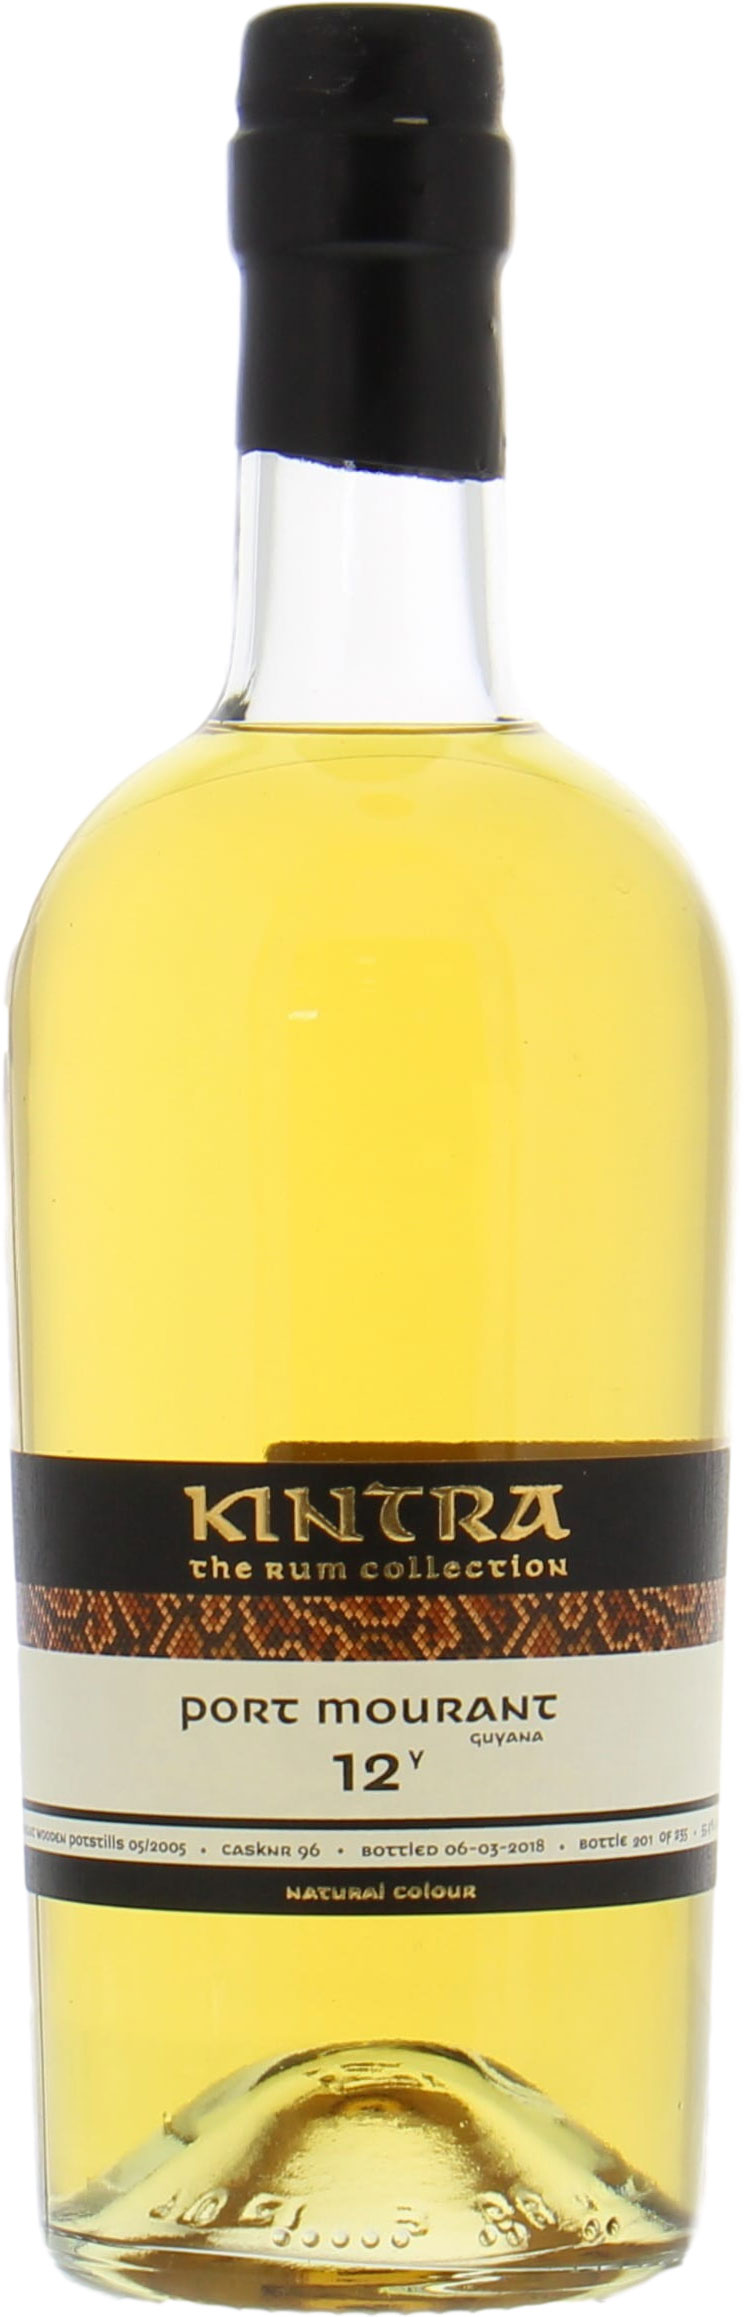 Port Mourant - 12 Years Old Kintra Wooden Potstills Cask 96 55.9% 2005 Perfect